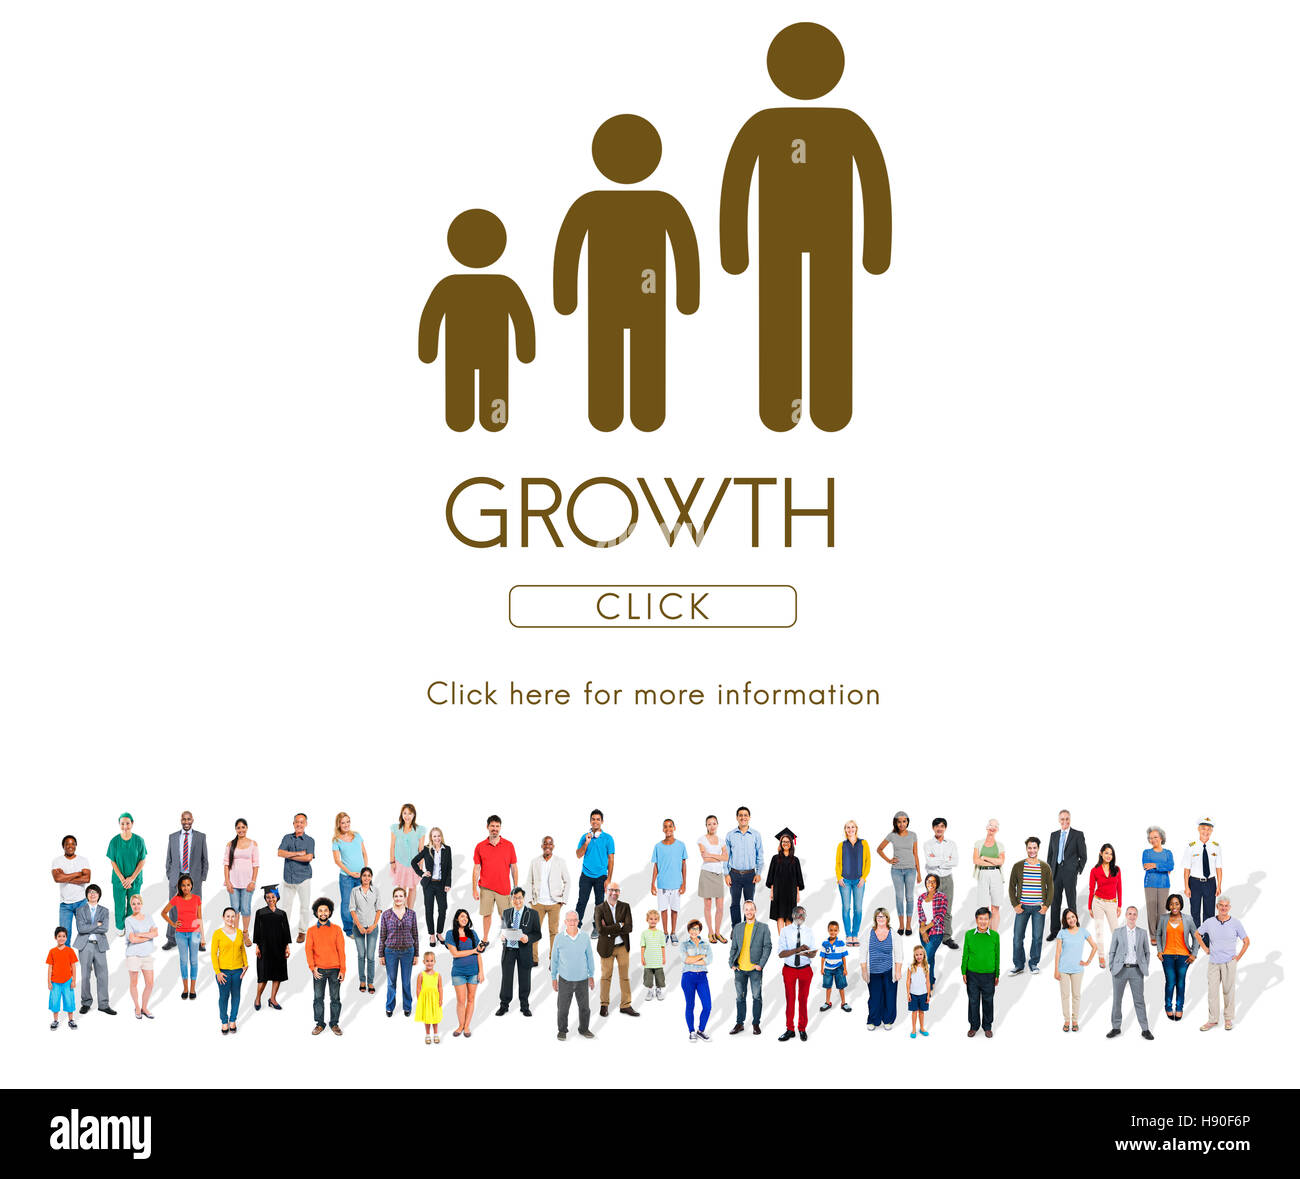 Growth Family Generations Relationship Concept Stock Photo